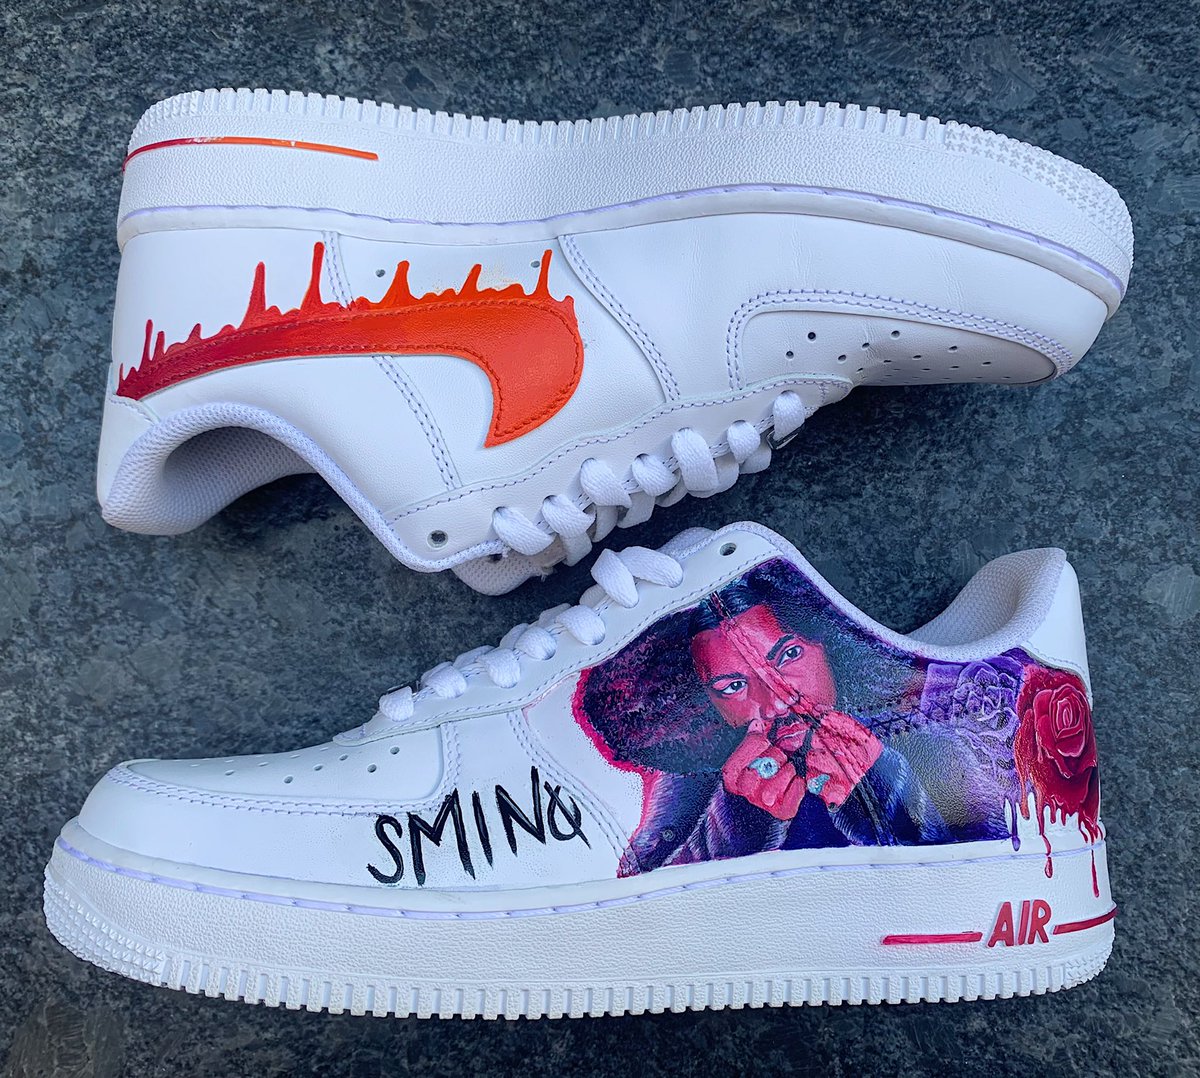 “I rock Air Forces, don’t force shit” 
@smino @zerofatigue 
•
•
•
#smino #zerofatigue #customairforces #angelusdirect